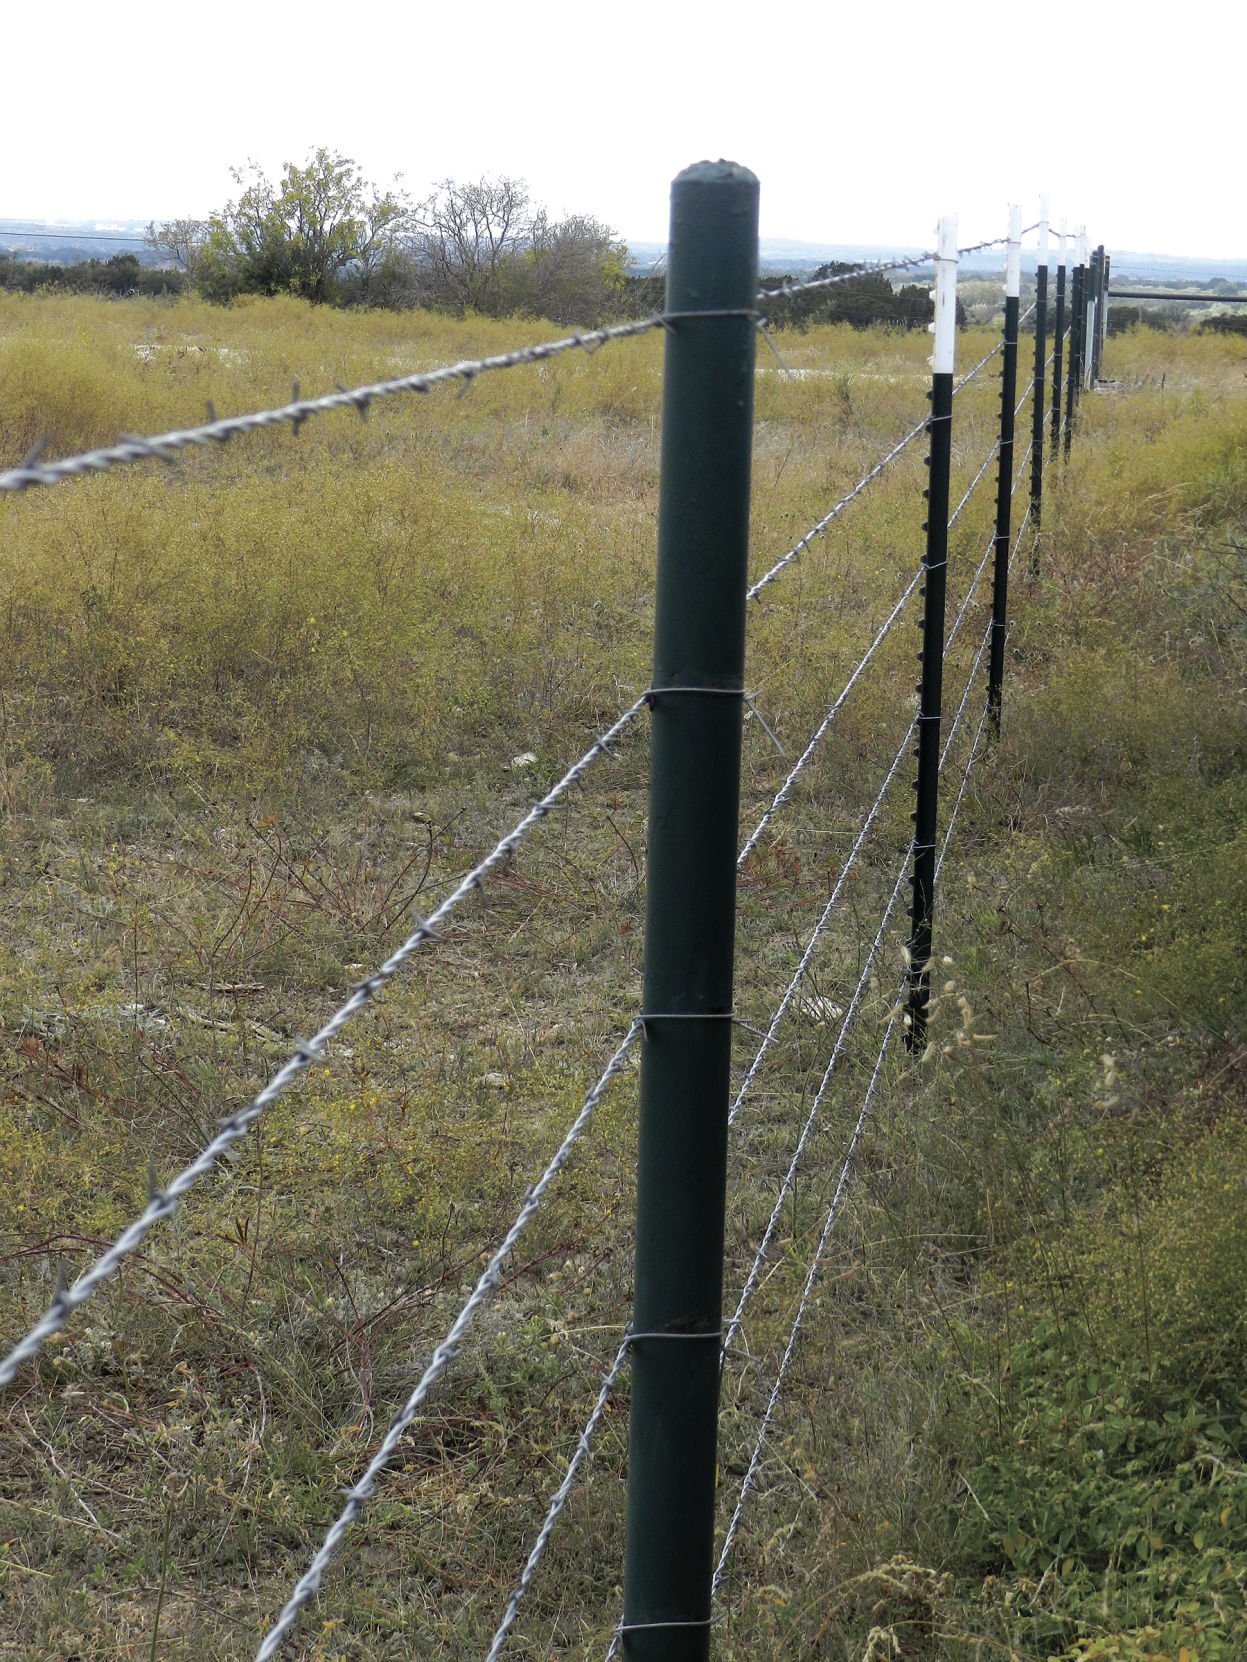 buy barb wire fencing